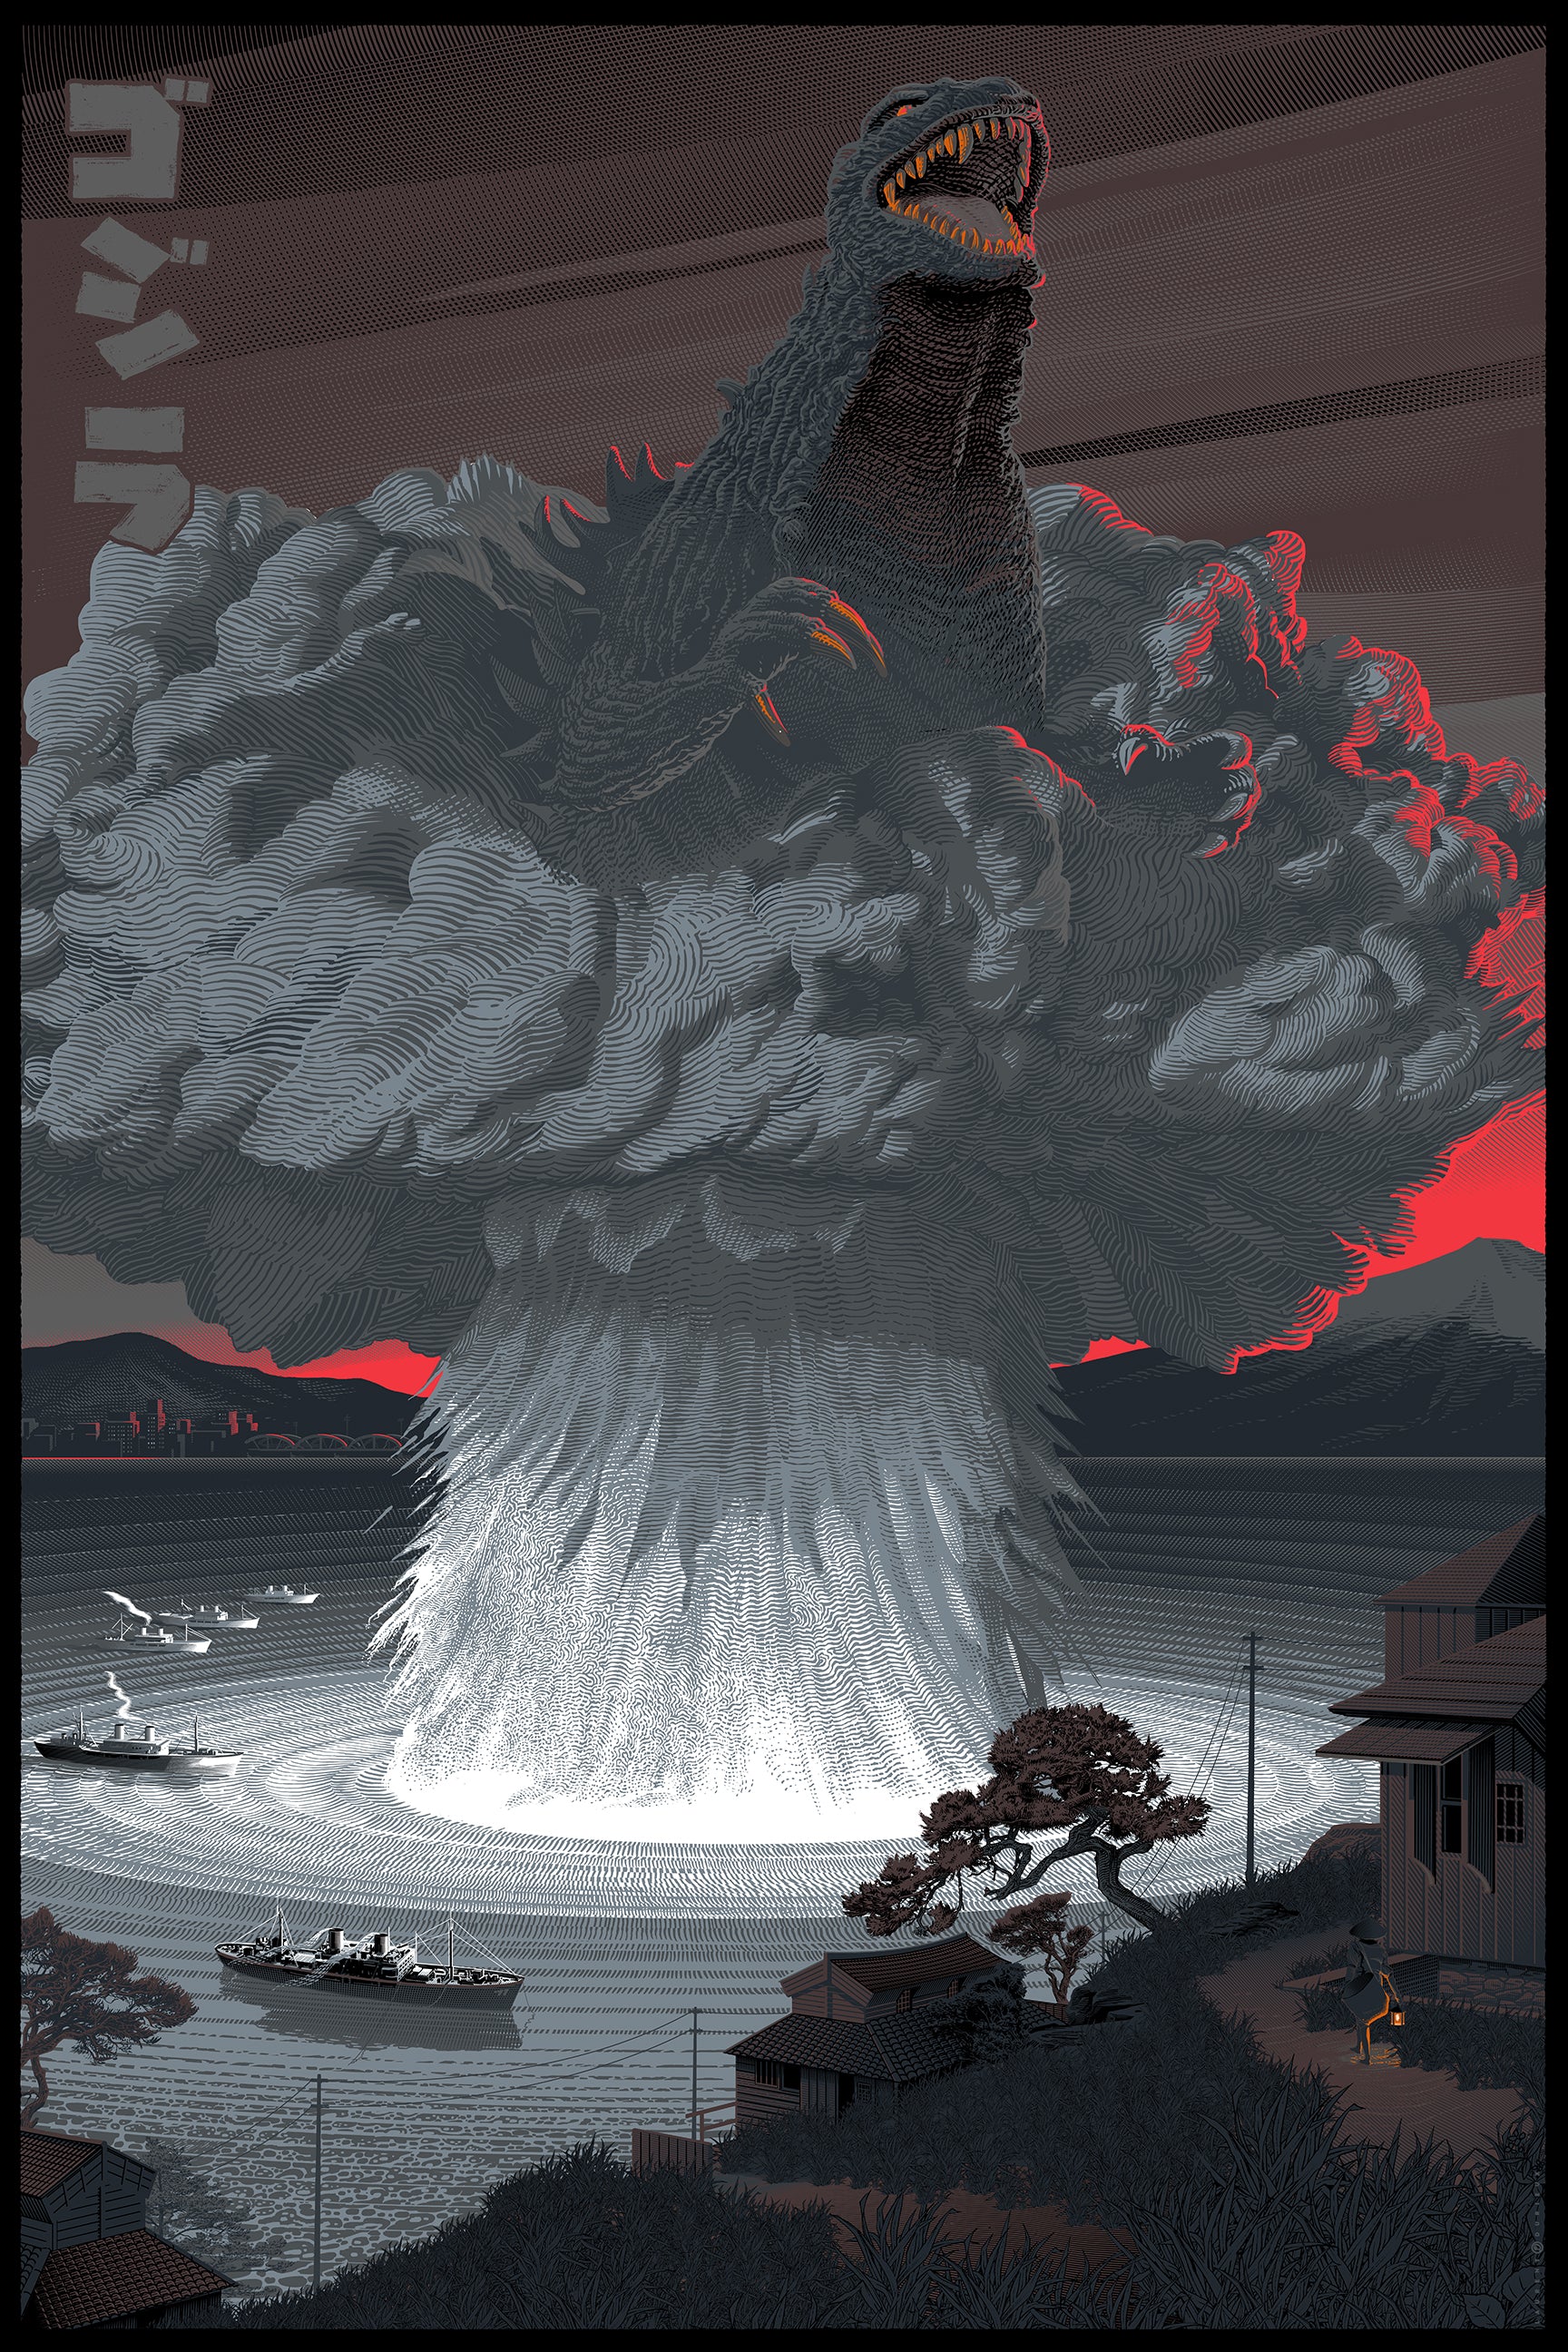 Title:  "Godzilla"  Artist:  Laurent Durieux  Edition:  Variant edition. Released by Dark Hall Mansion in 2015 in a limited edition of 125, signed and numbered by the artist.  Type:  Screen print poster  Size:  36" x 24"  Notes:  Inspired by the iconic film.  Stored flat in very good condition.  Check out our other listings for more hard-to-find and out-of-print posters.